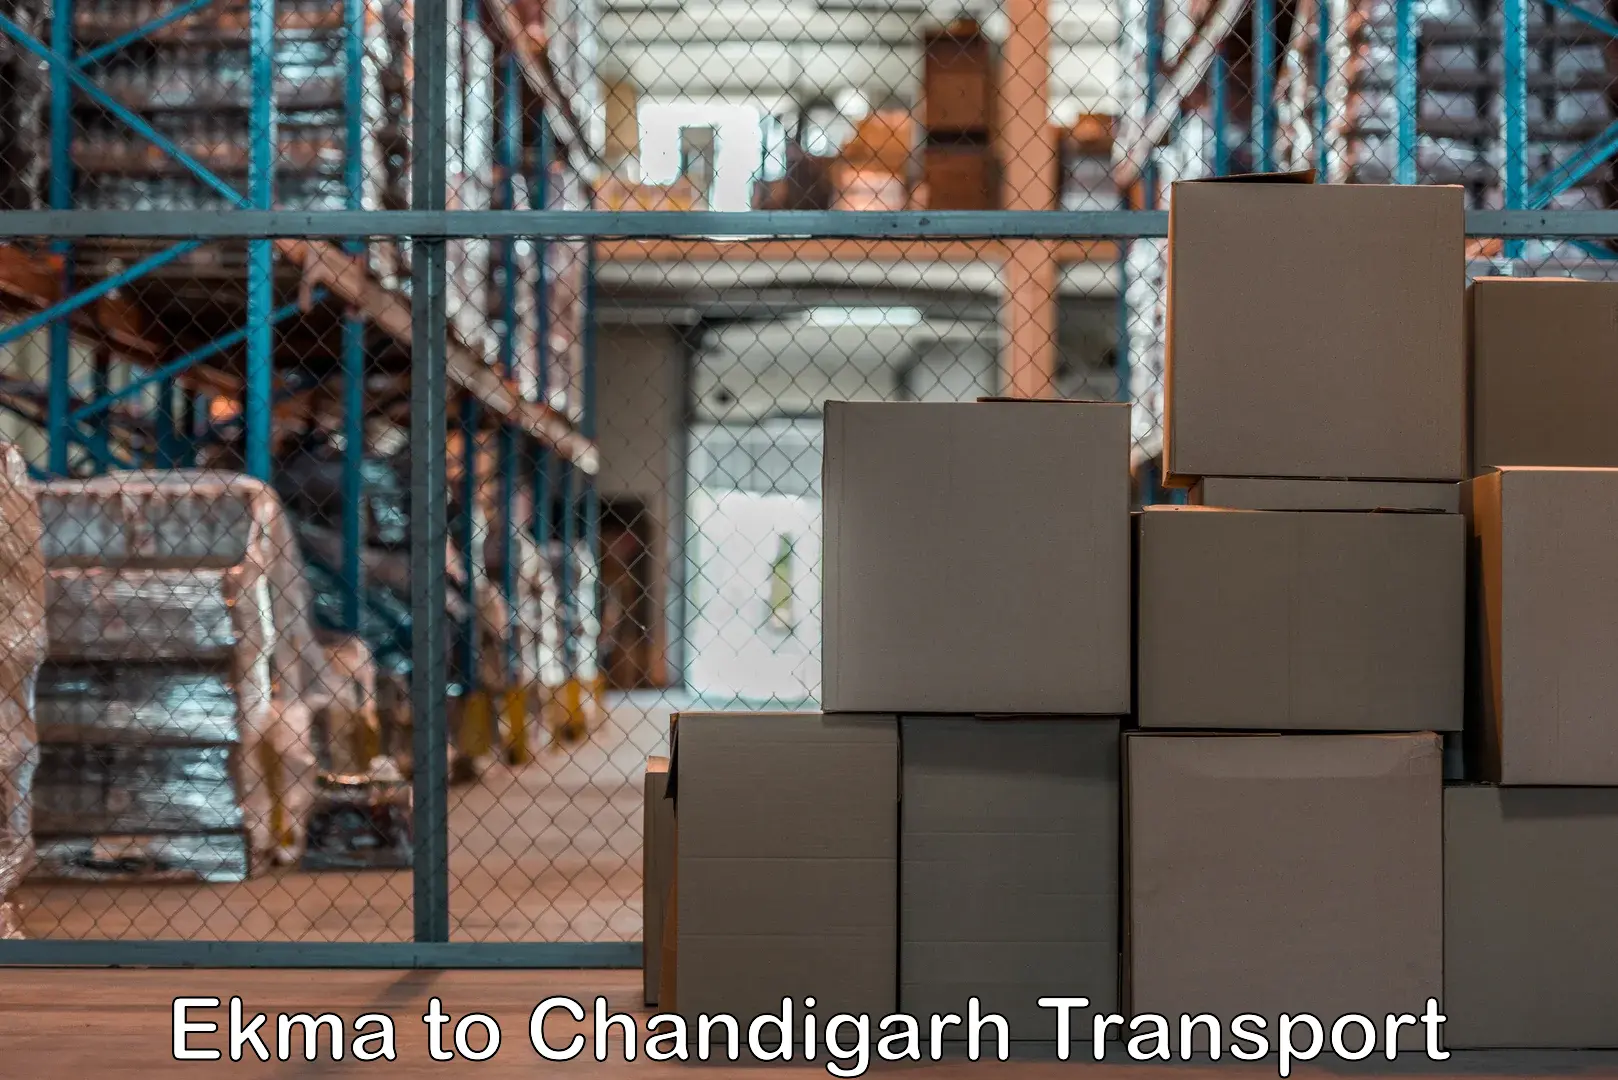 Container transport service Ekma to Chandigarh